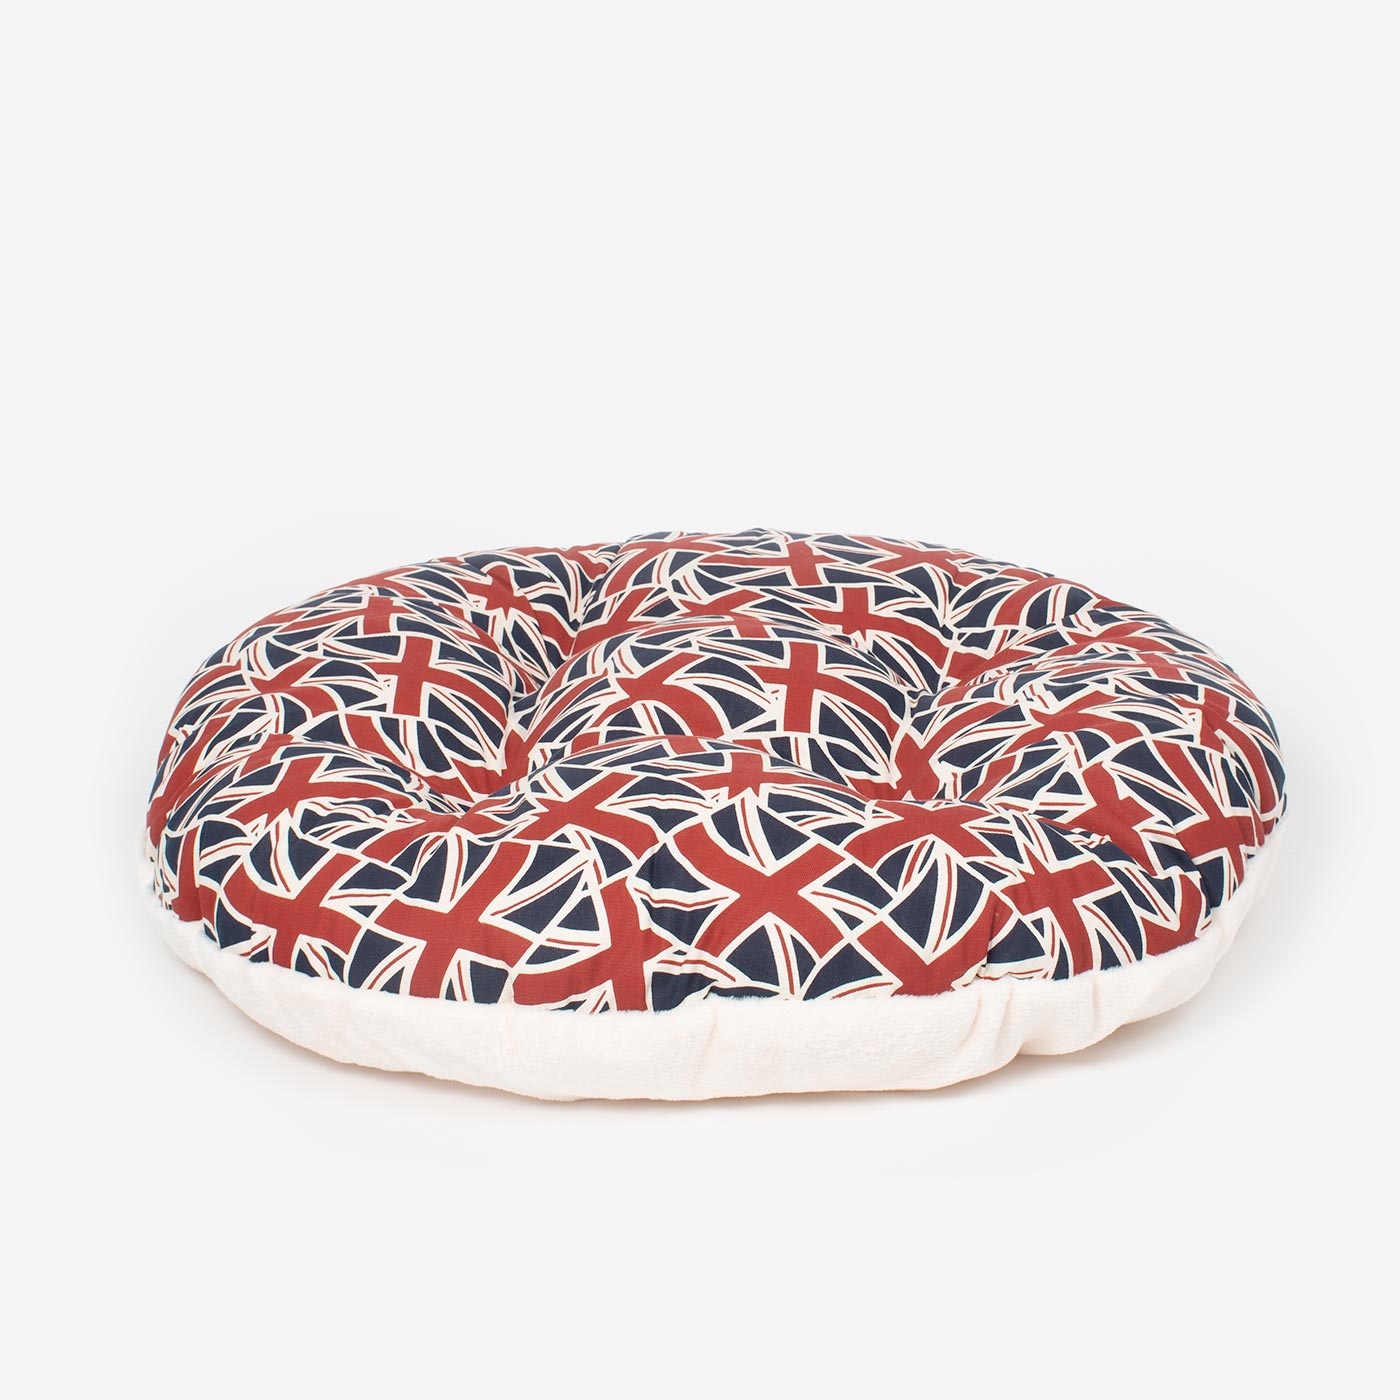 High Wall Bed For Dogs in Union Jack by Lords & Labradors